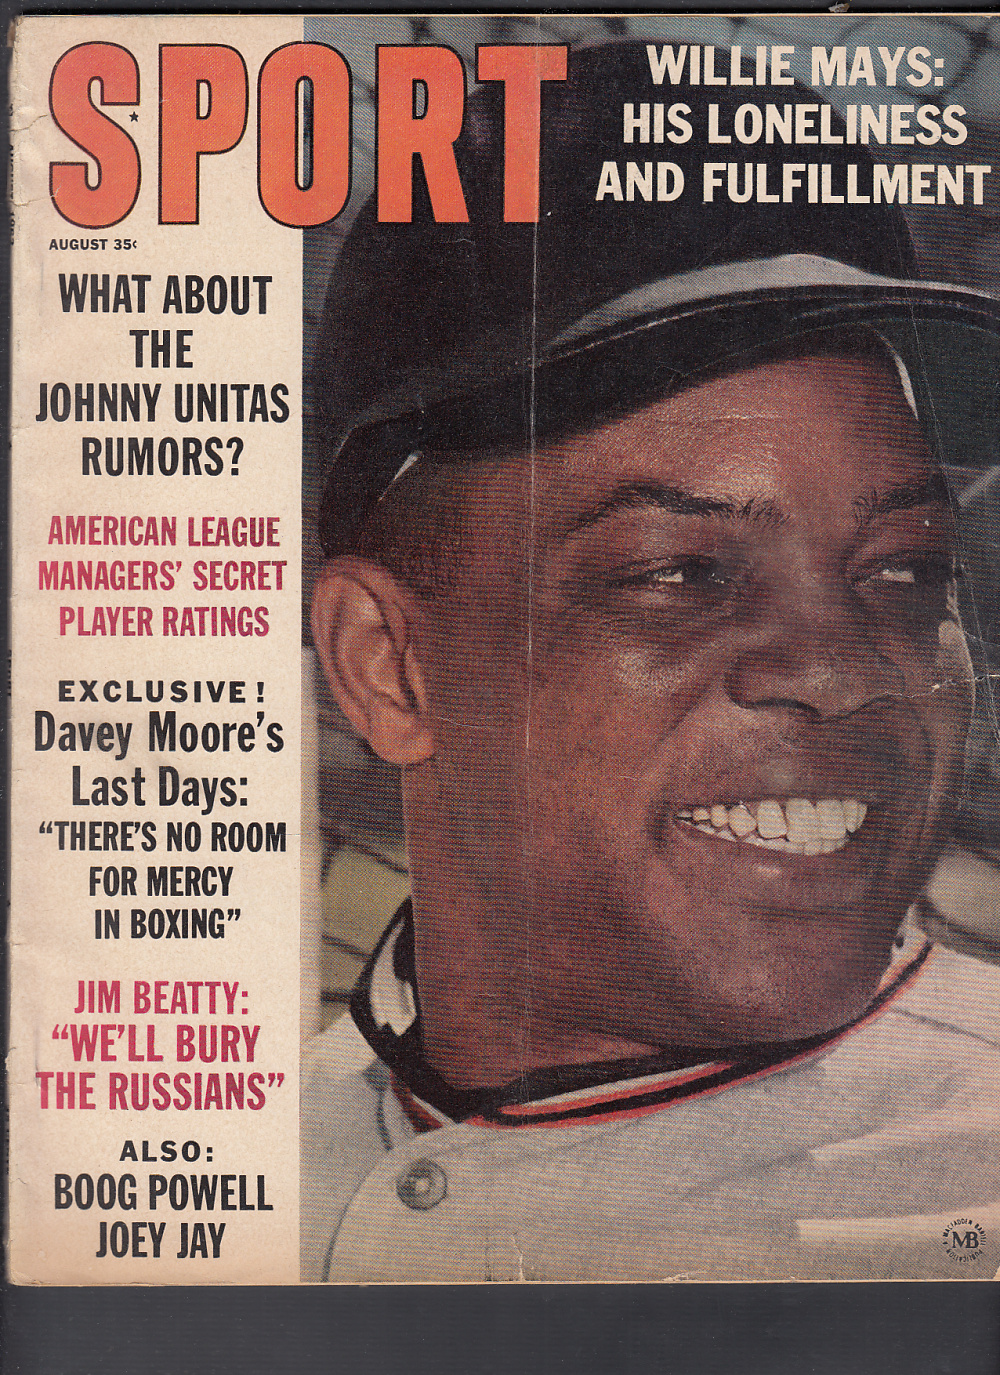 1963 SPORT FULL MAGAZINE W. MAYS ON COVER photo